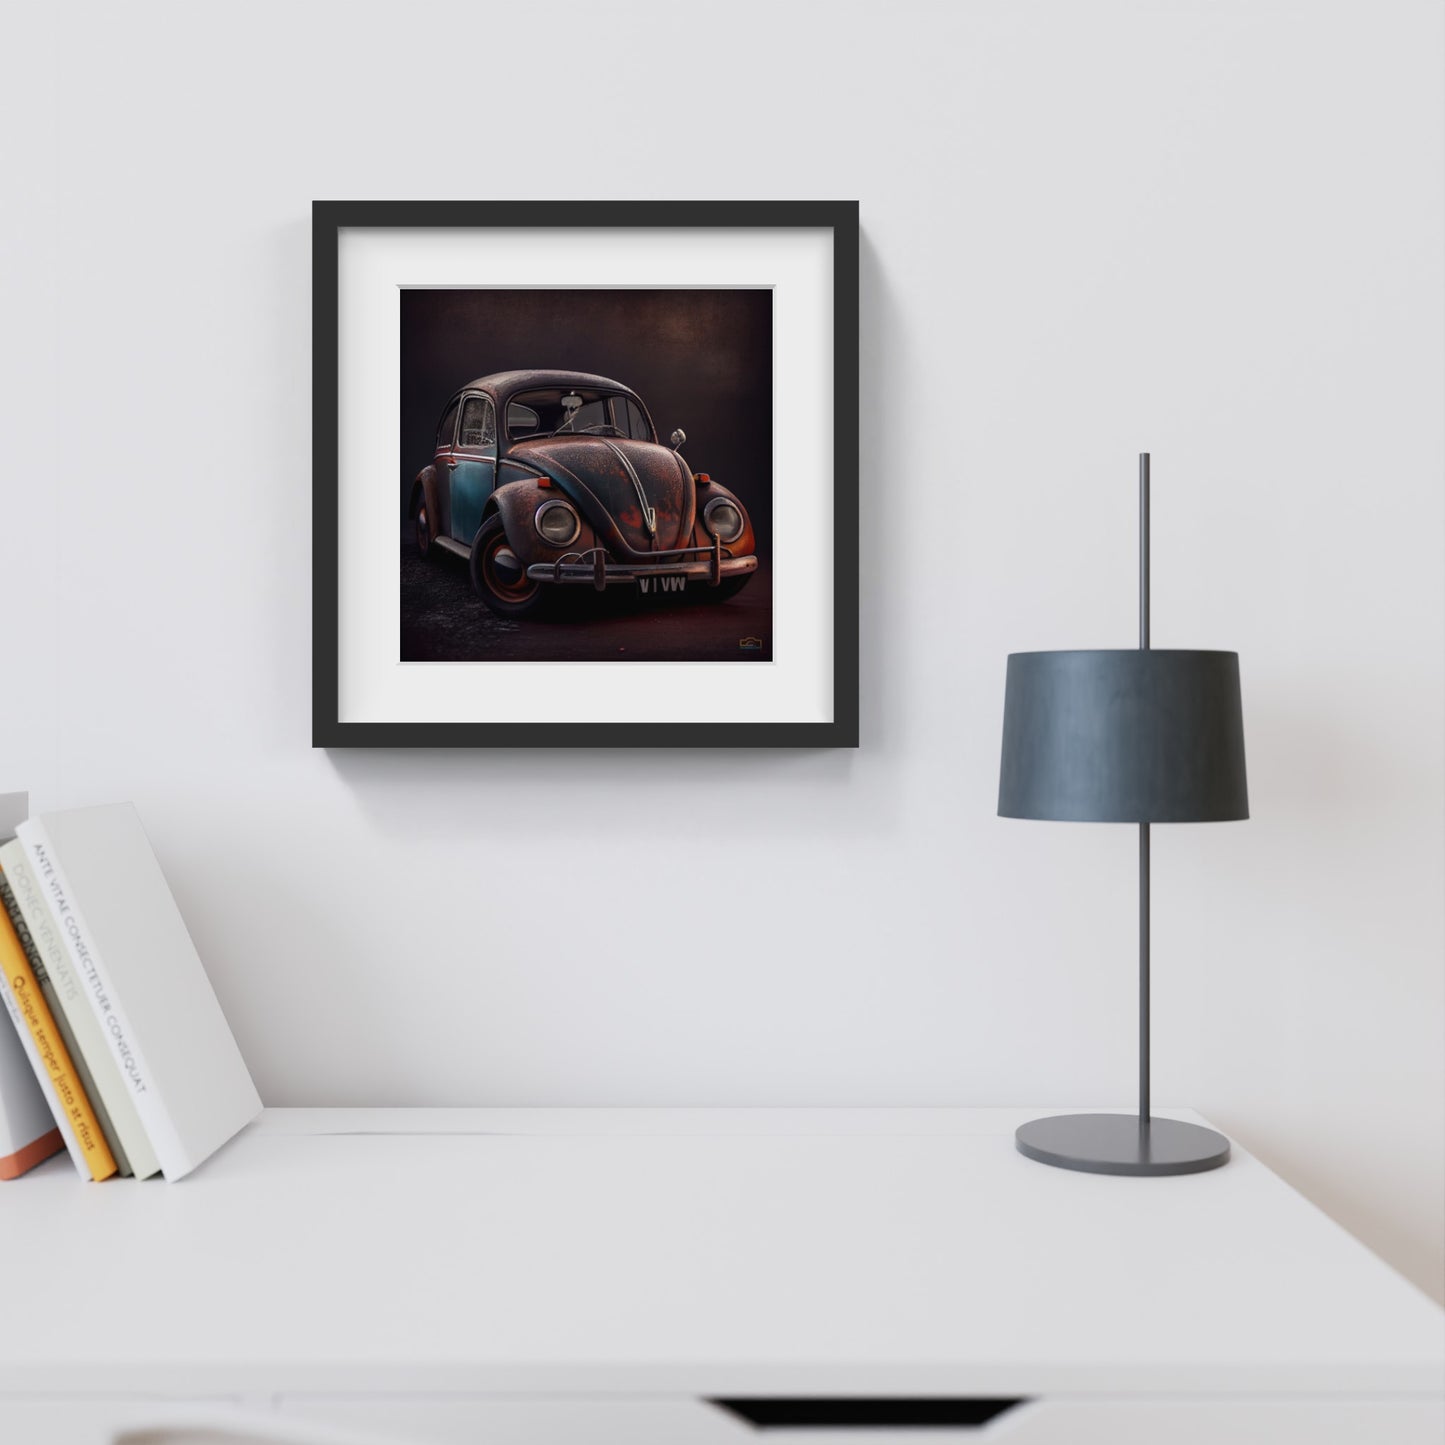 A hyper-realistic image of a vintage beetle